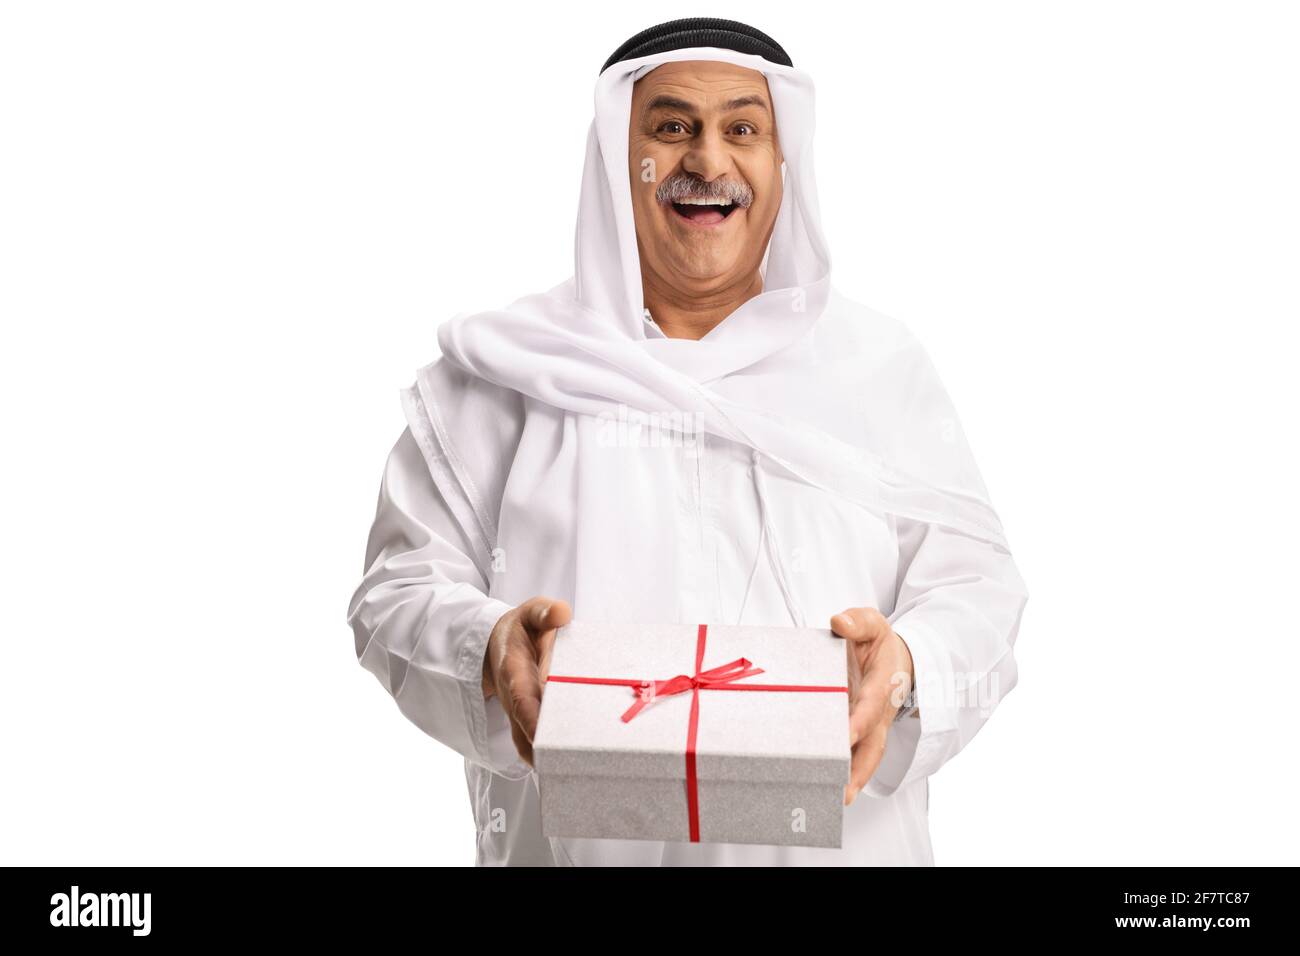 Cheerful mature arab man holding a gift box isolated on white background Stock Photo